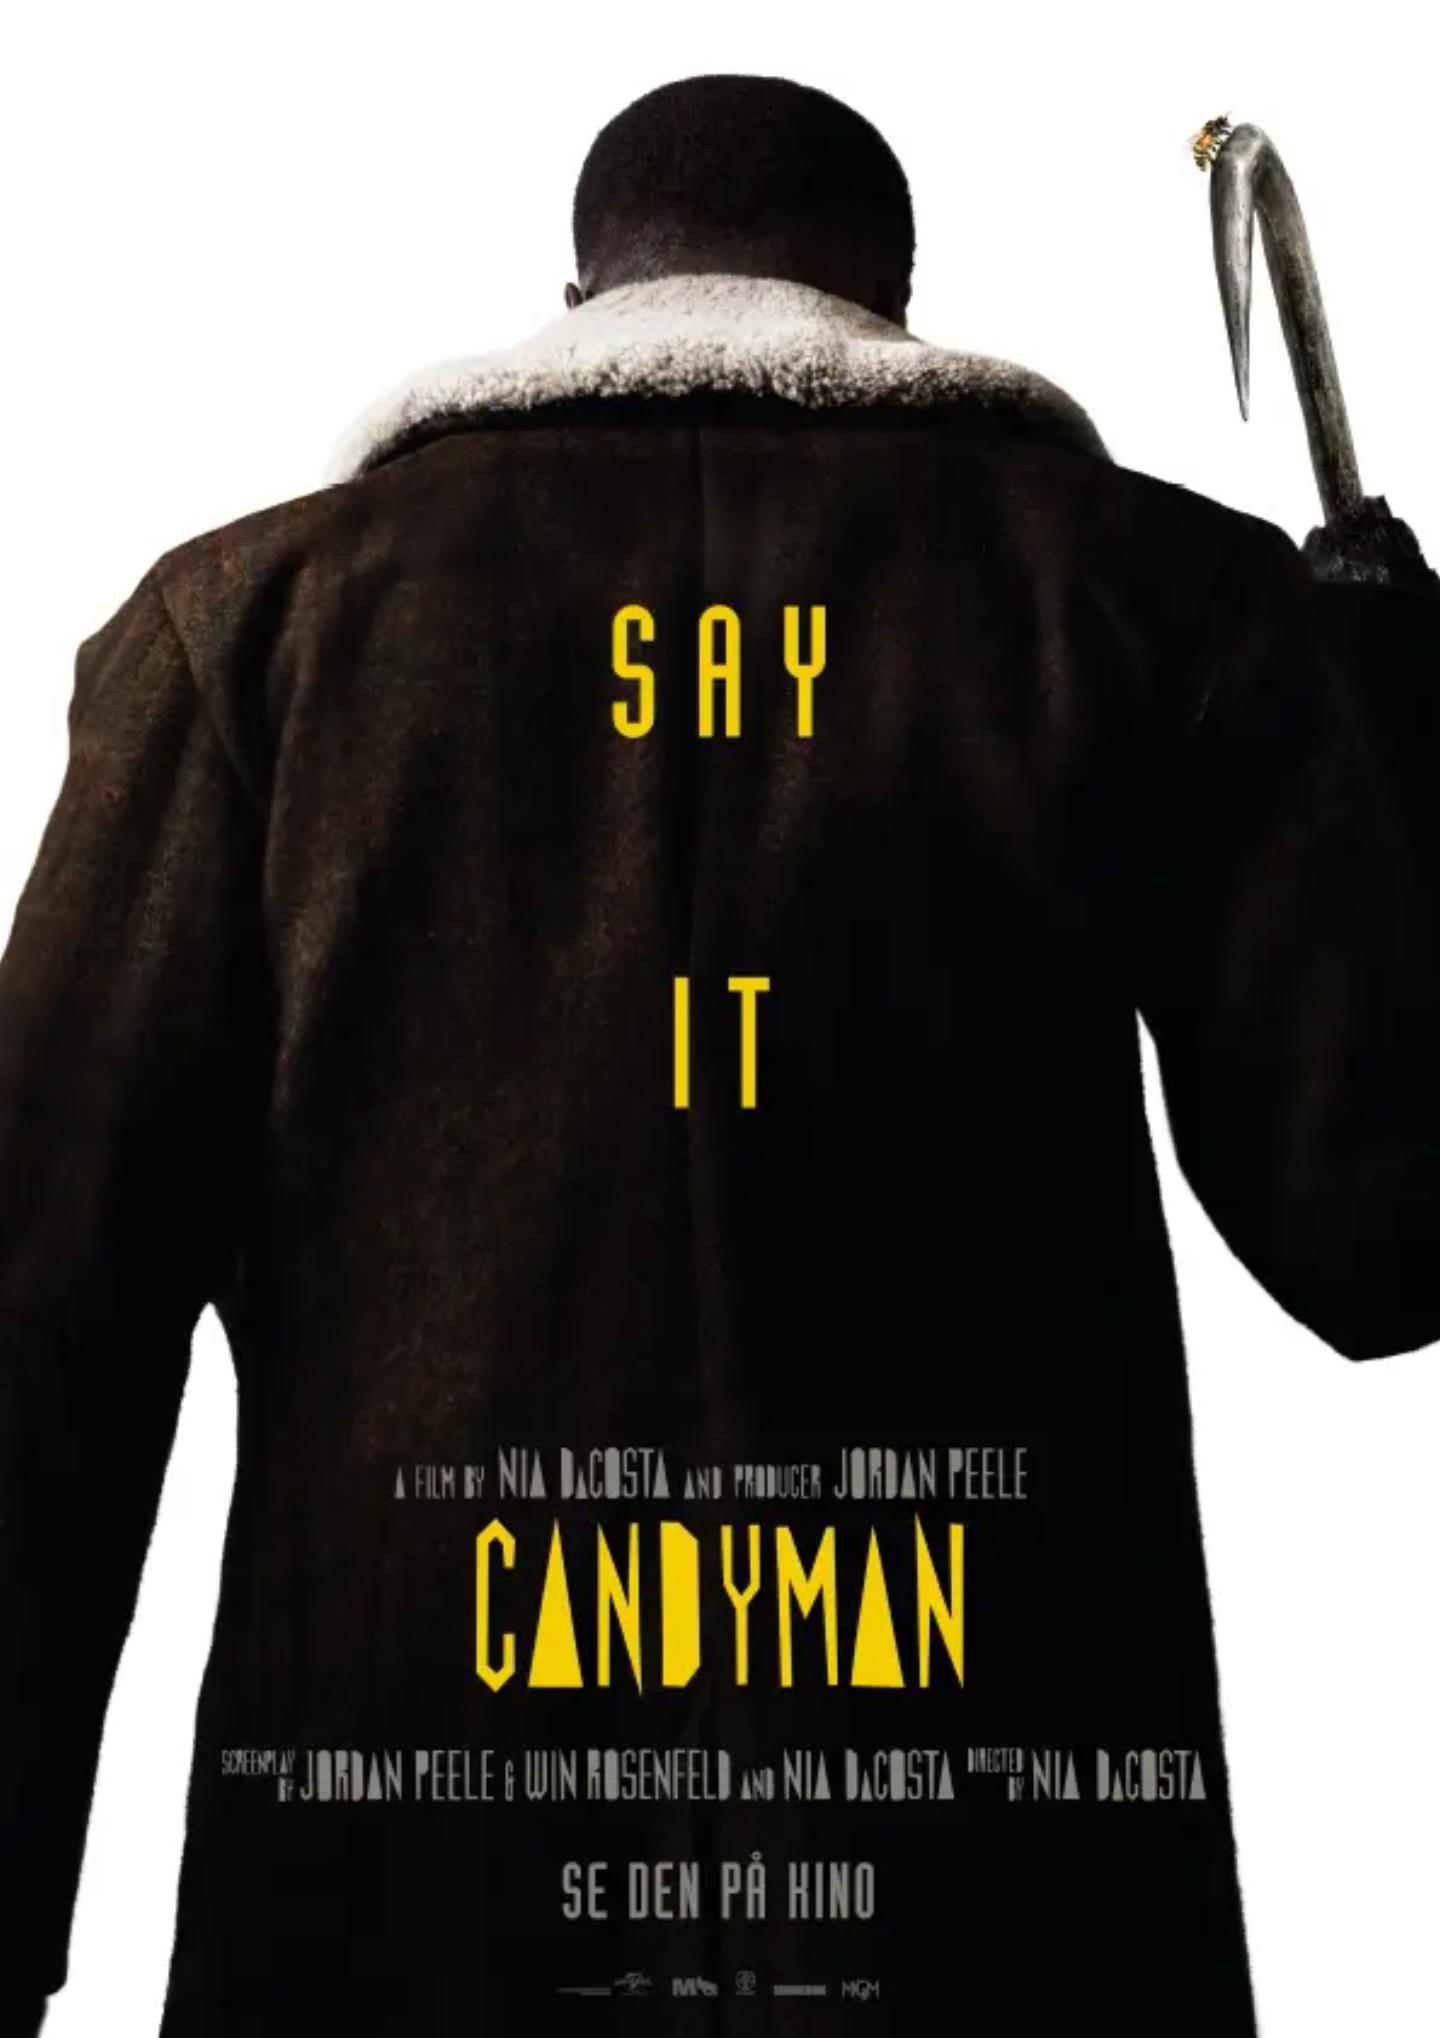 Plakat for 'Candyman'